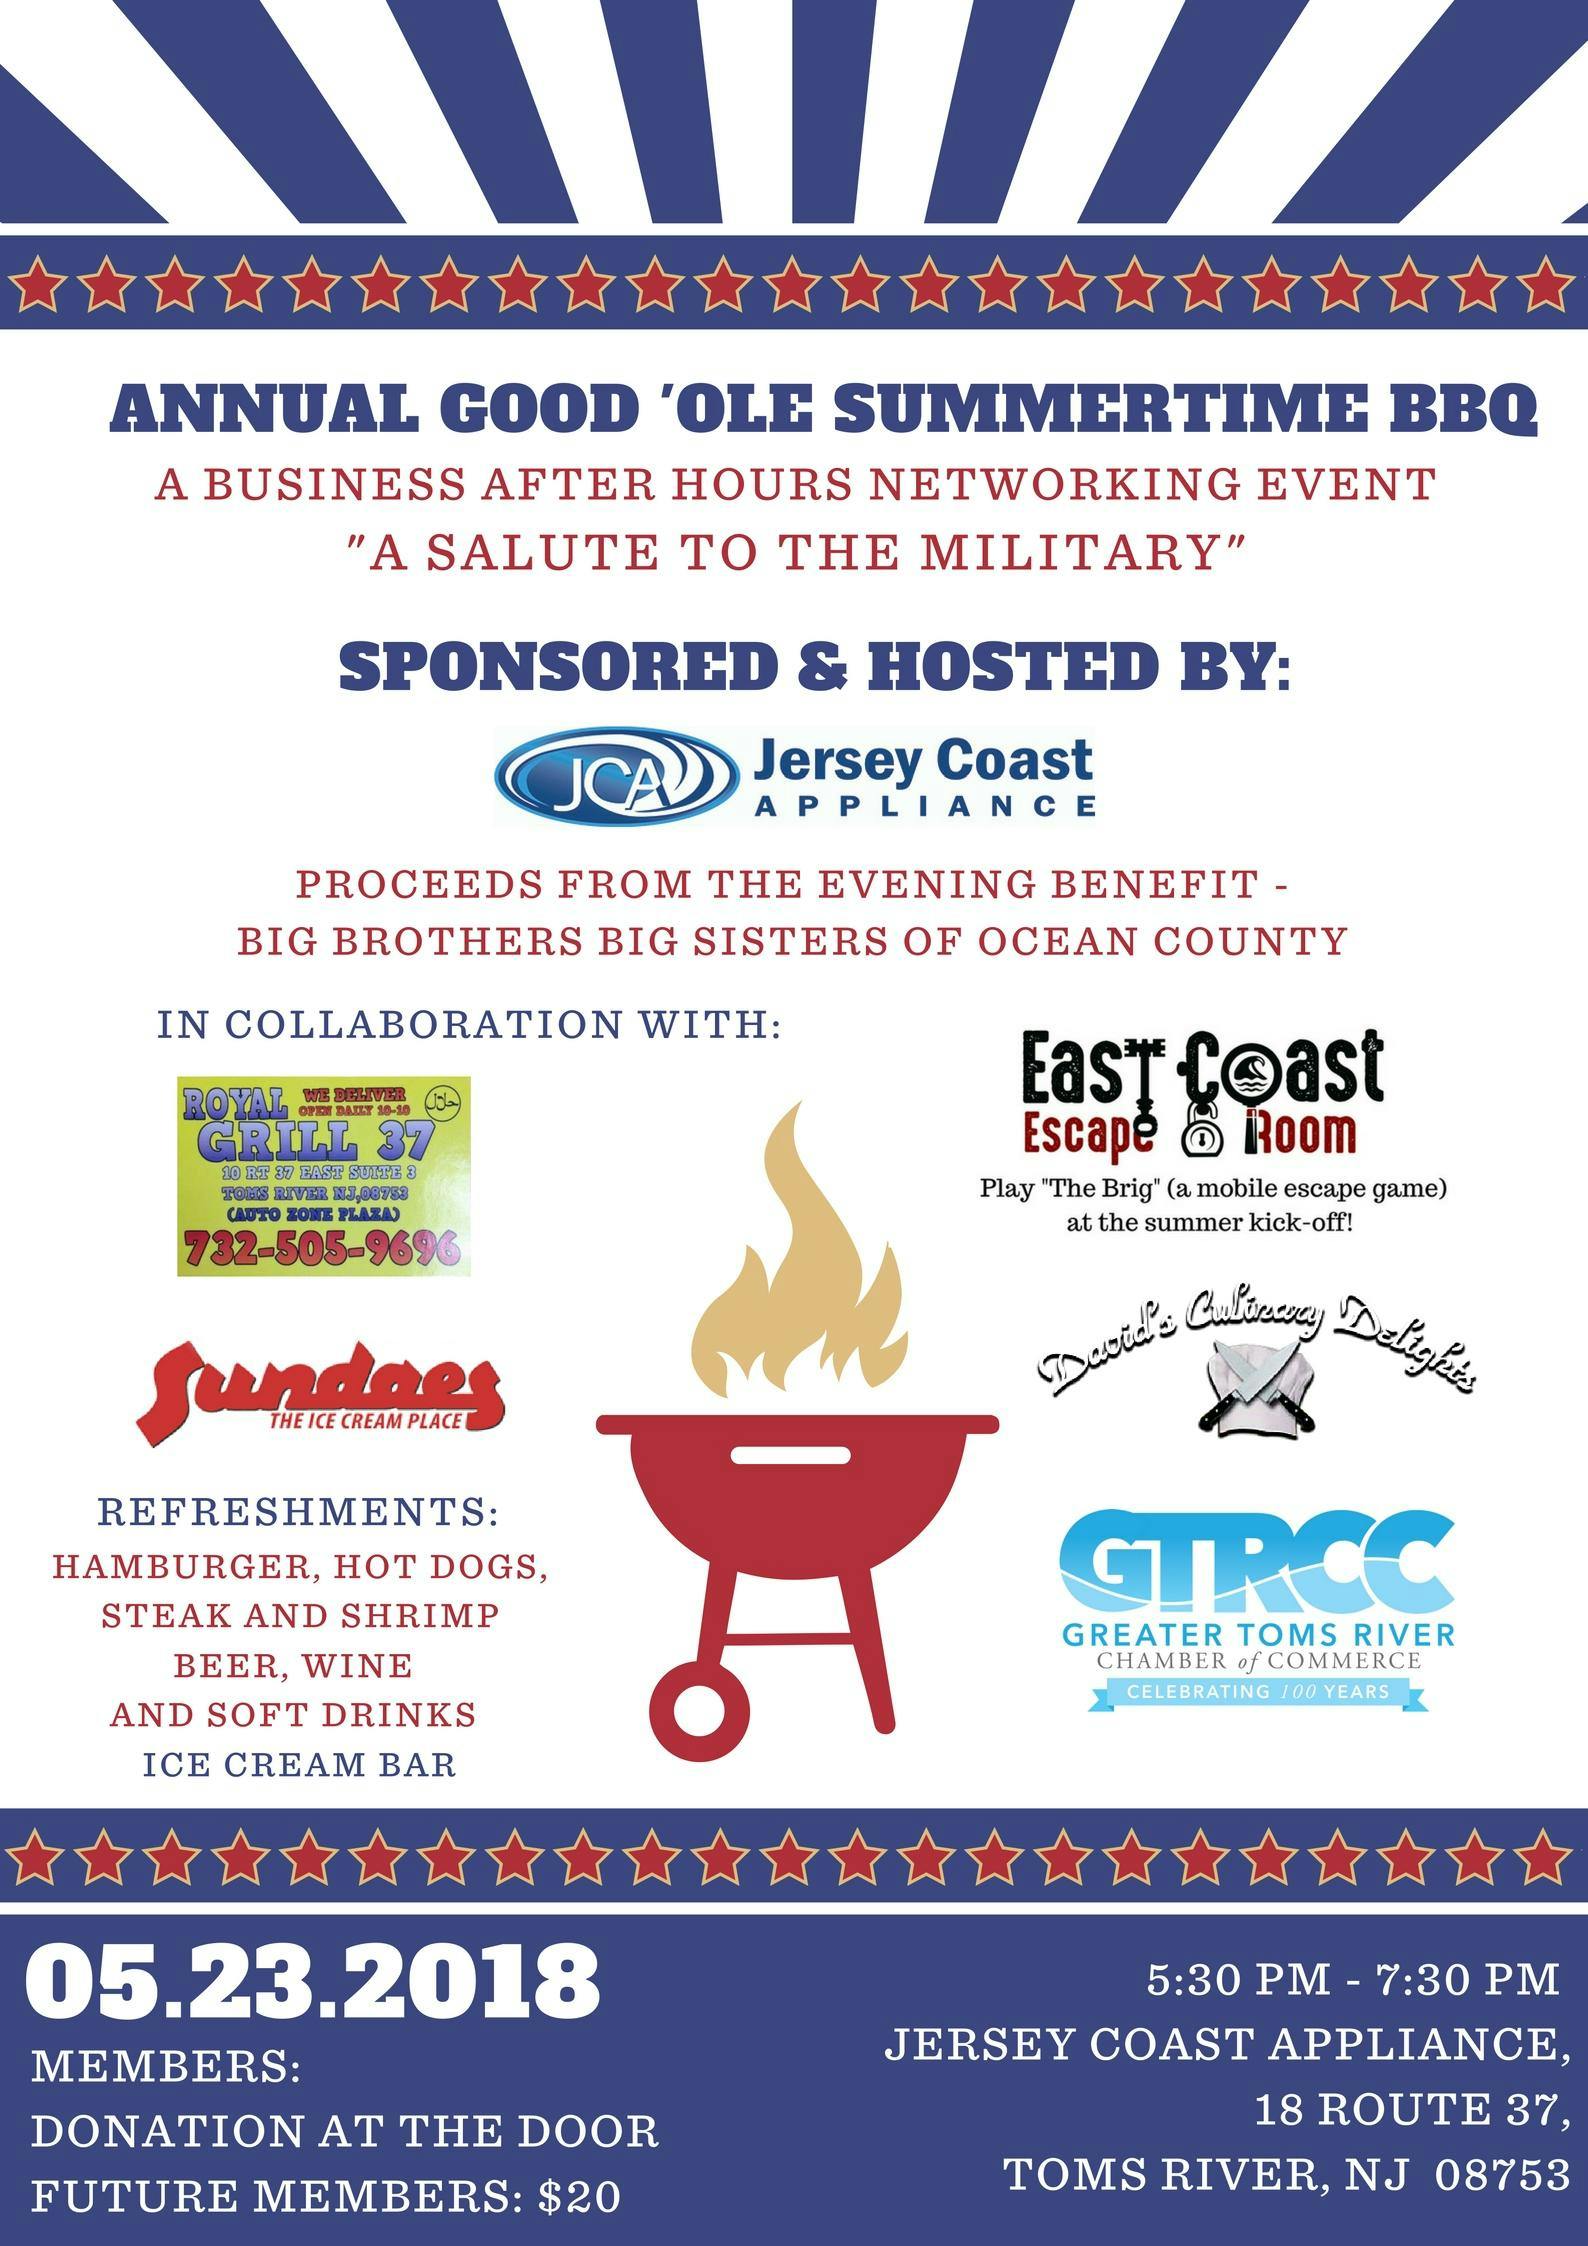 Annual Good 'Ole Summertime BBQ Business After Hours Networking Event